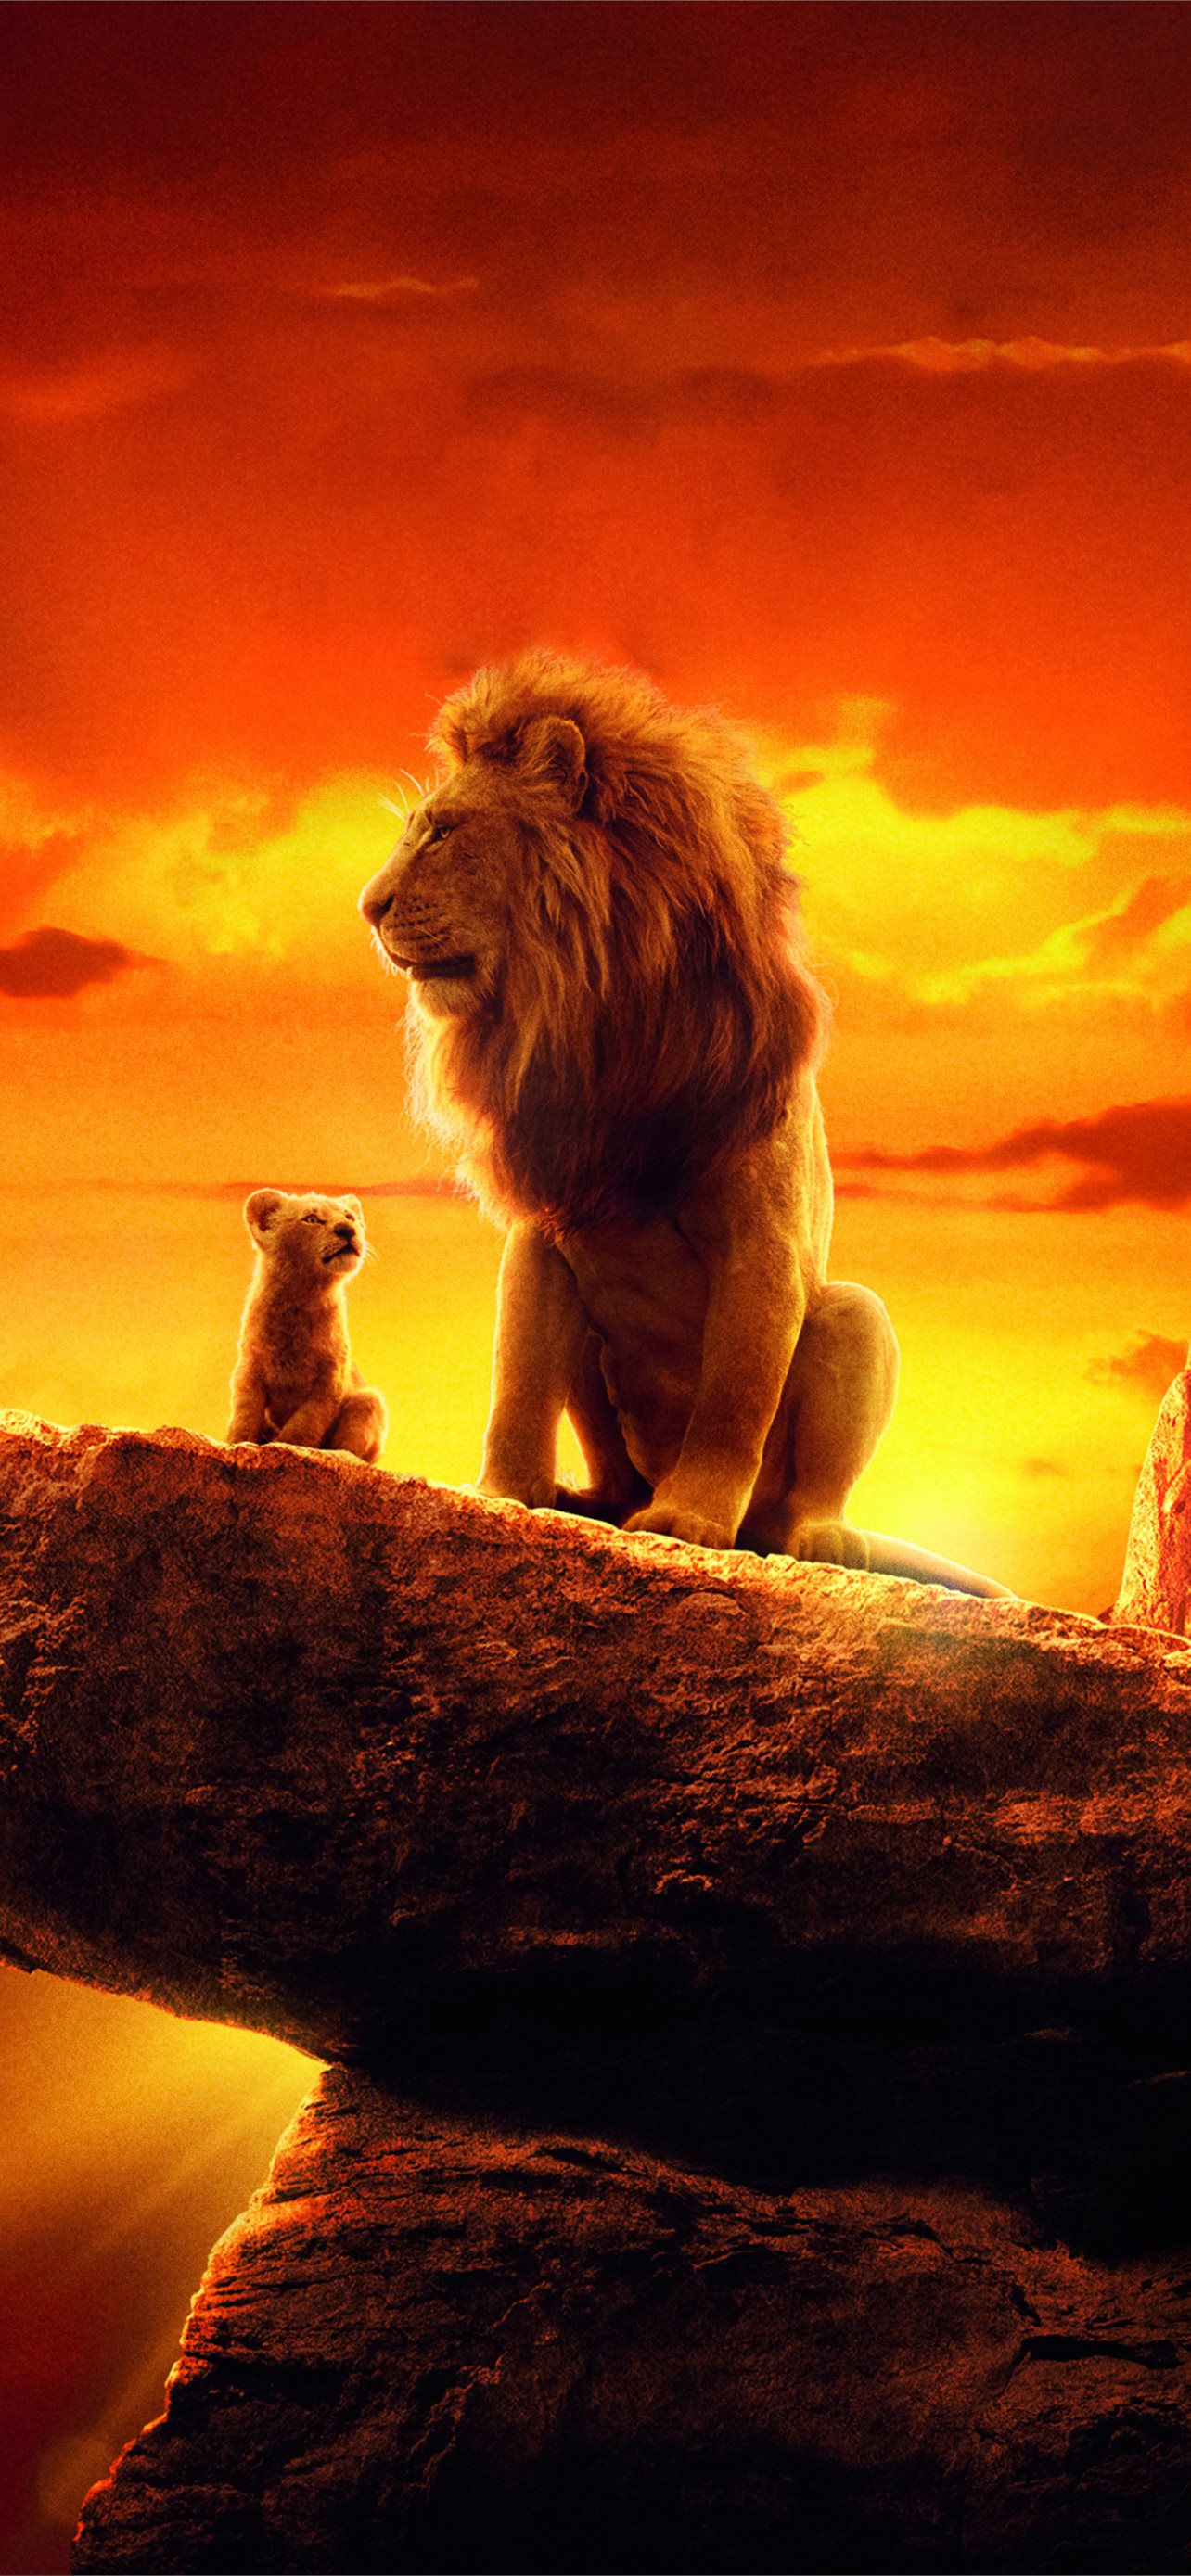 The Lion King 2019 4K Movie Samsung Galaxy Note 9 ... Iphone Wallpapers  Free Download